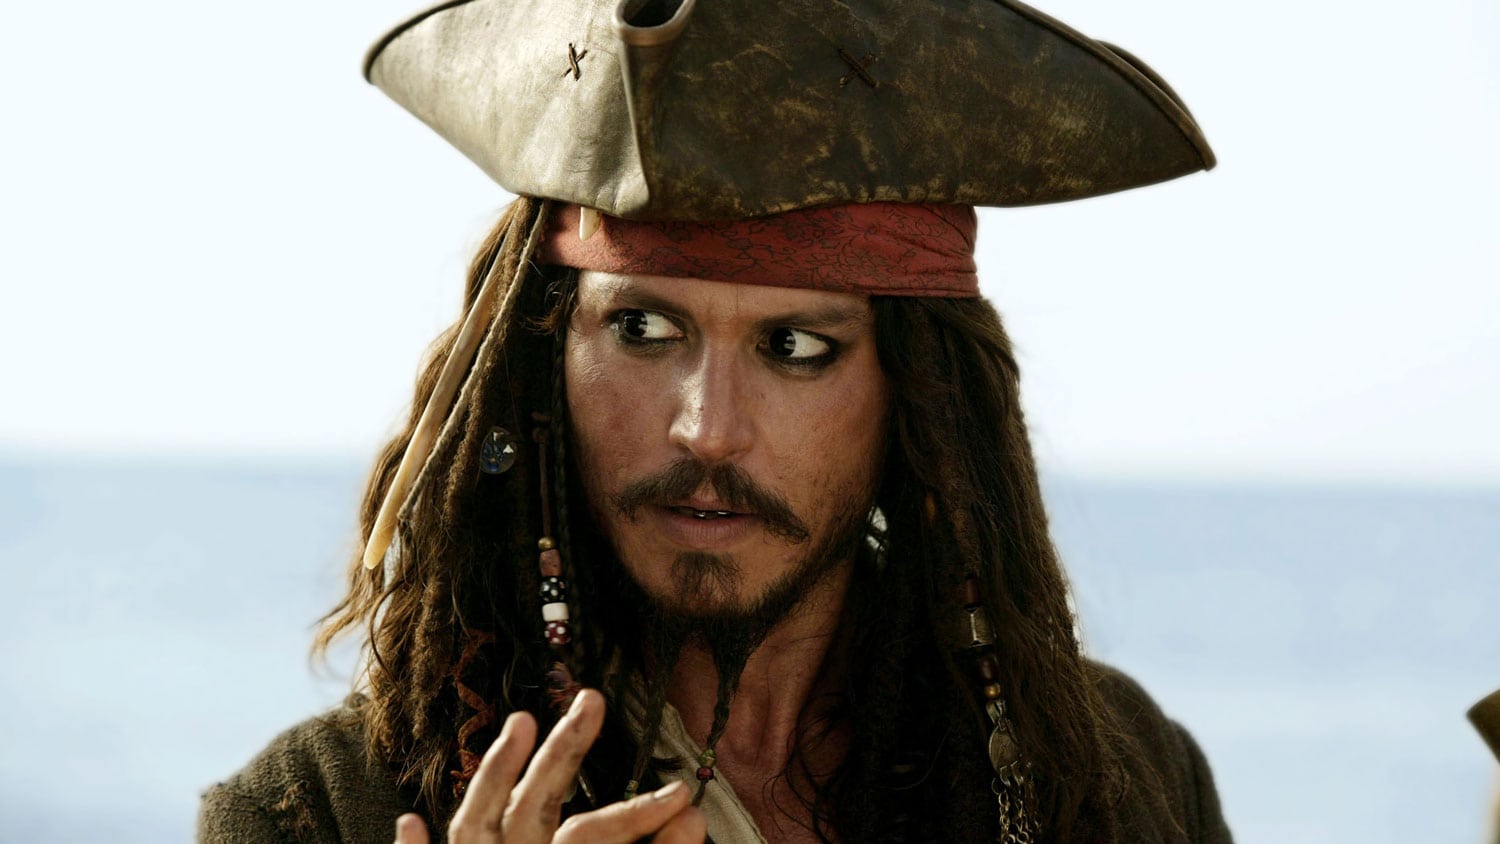 No-Disney-Hasn't-Offered-Johnny-Depp-$301M-To-Return-In-A-Future-Pirates-Movie